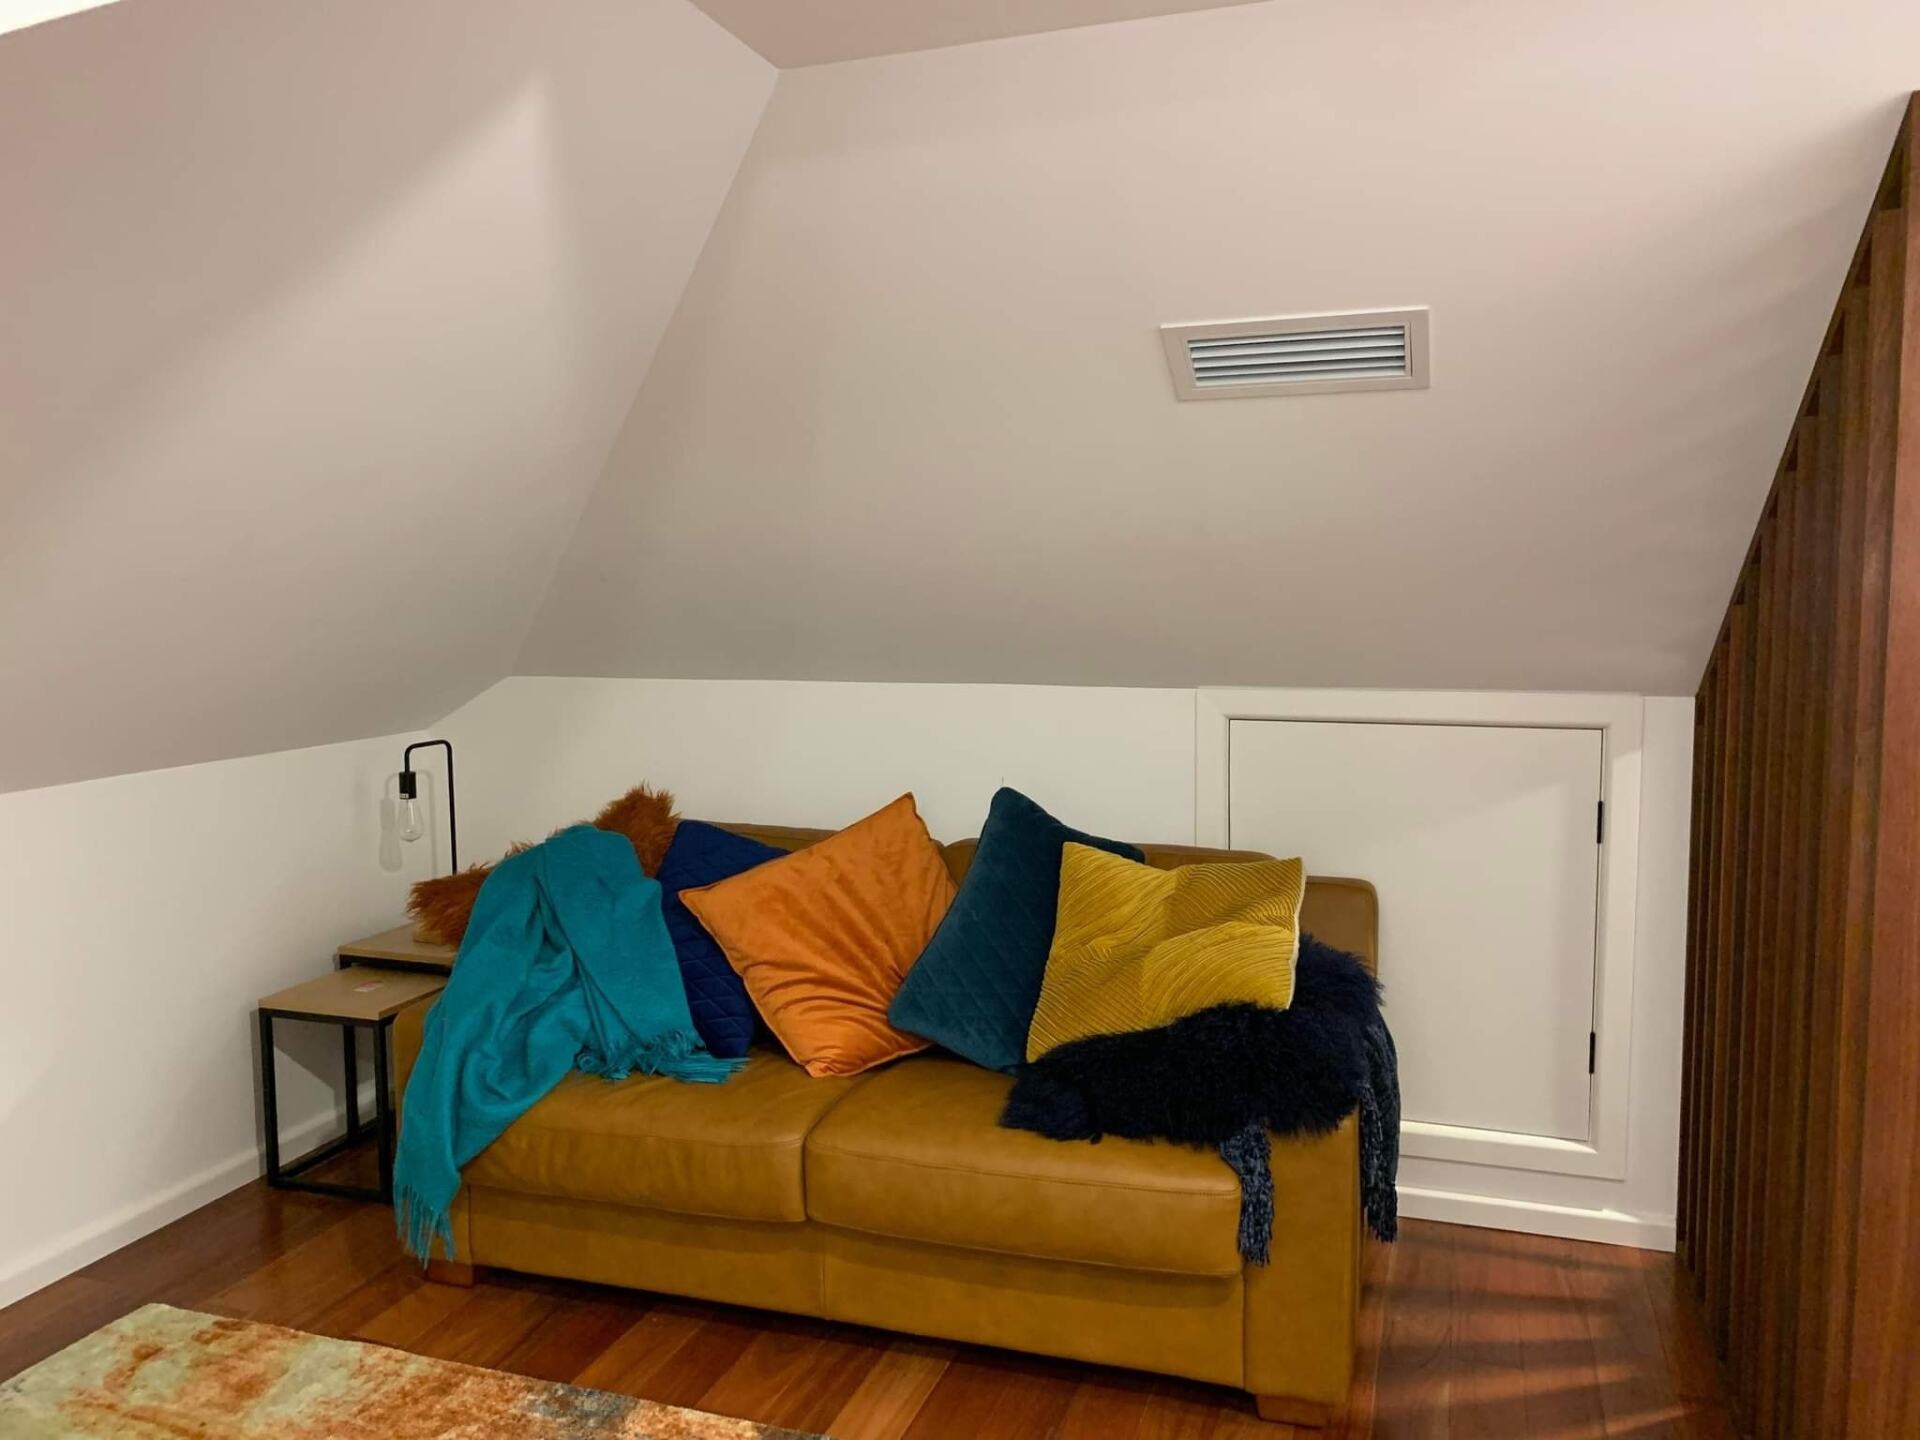 Ducted Heating System And A Cozy Sofa — Ducted Heating in Illawarra, NSW